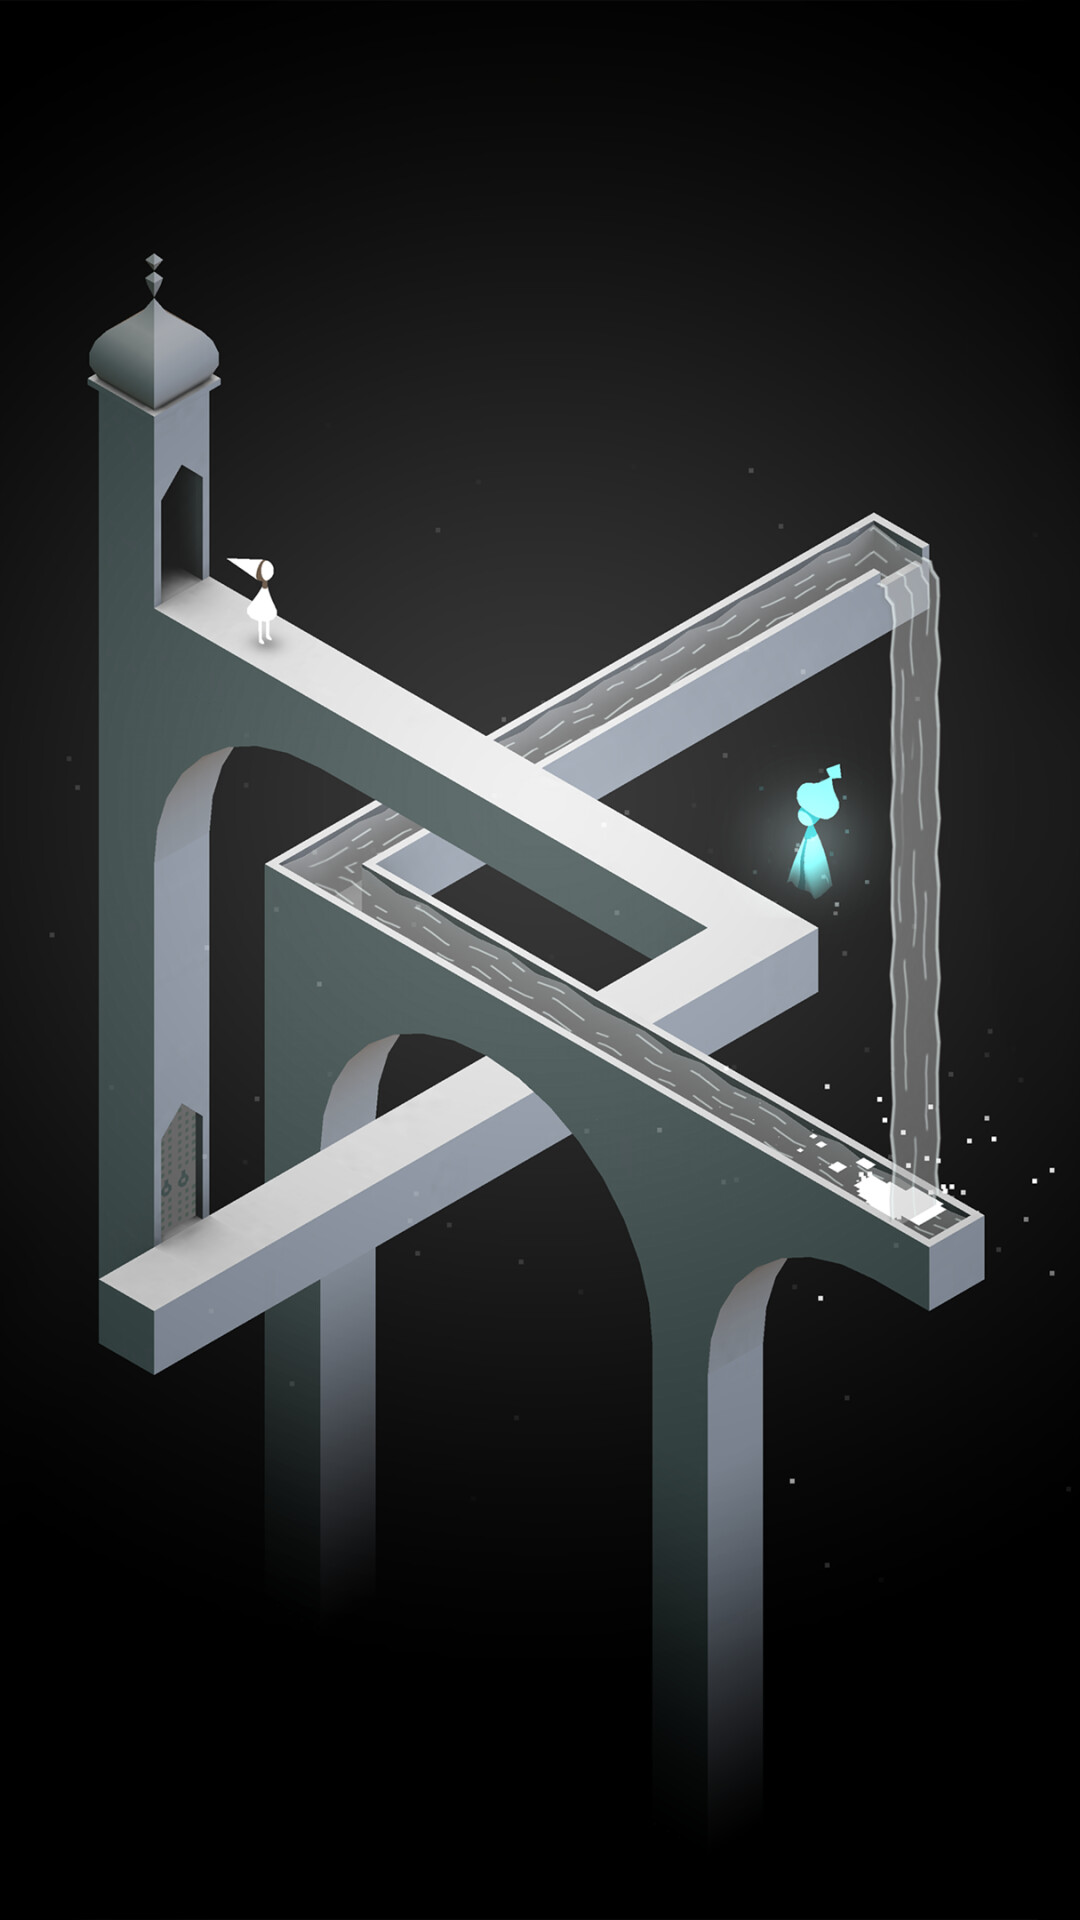 Monument Valley: A landmark game on the App Store, A title that brought a fascinatingly gorgeous experience to mobile gaming, The picturesque puzzler. 1080x1920 Full HD Wallpaper.